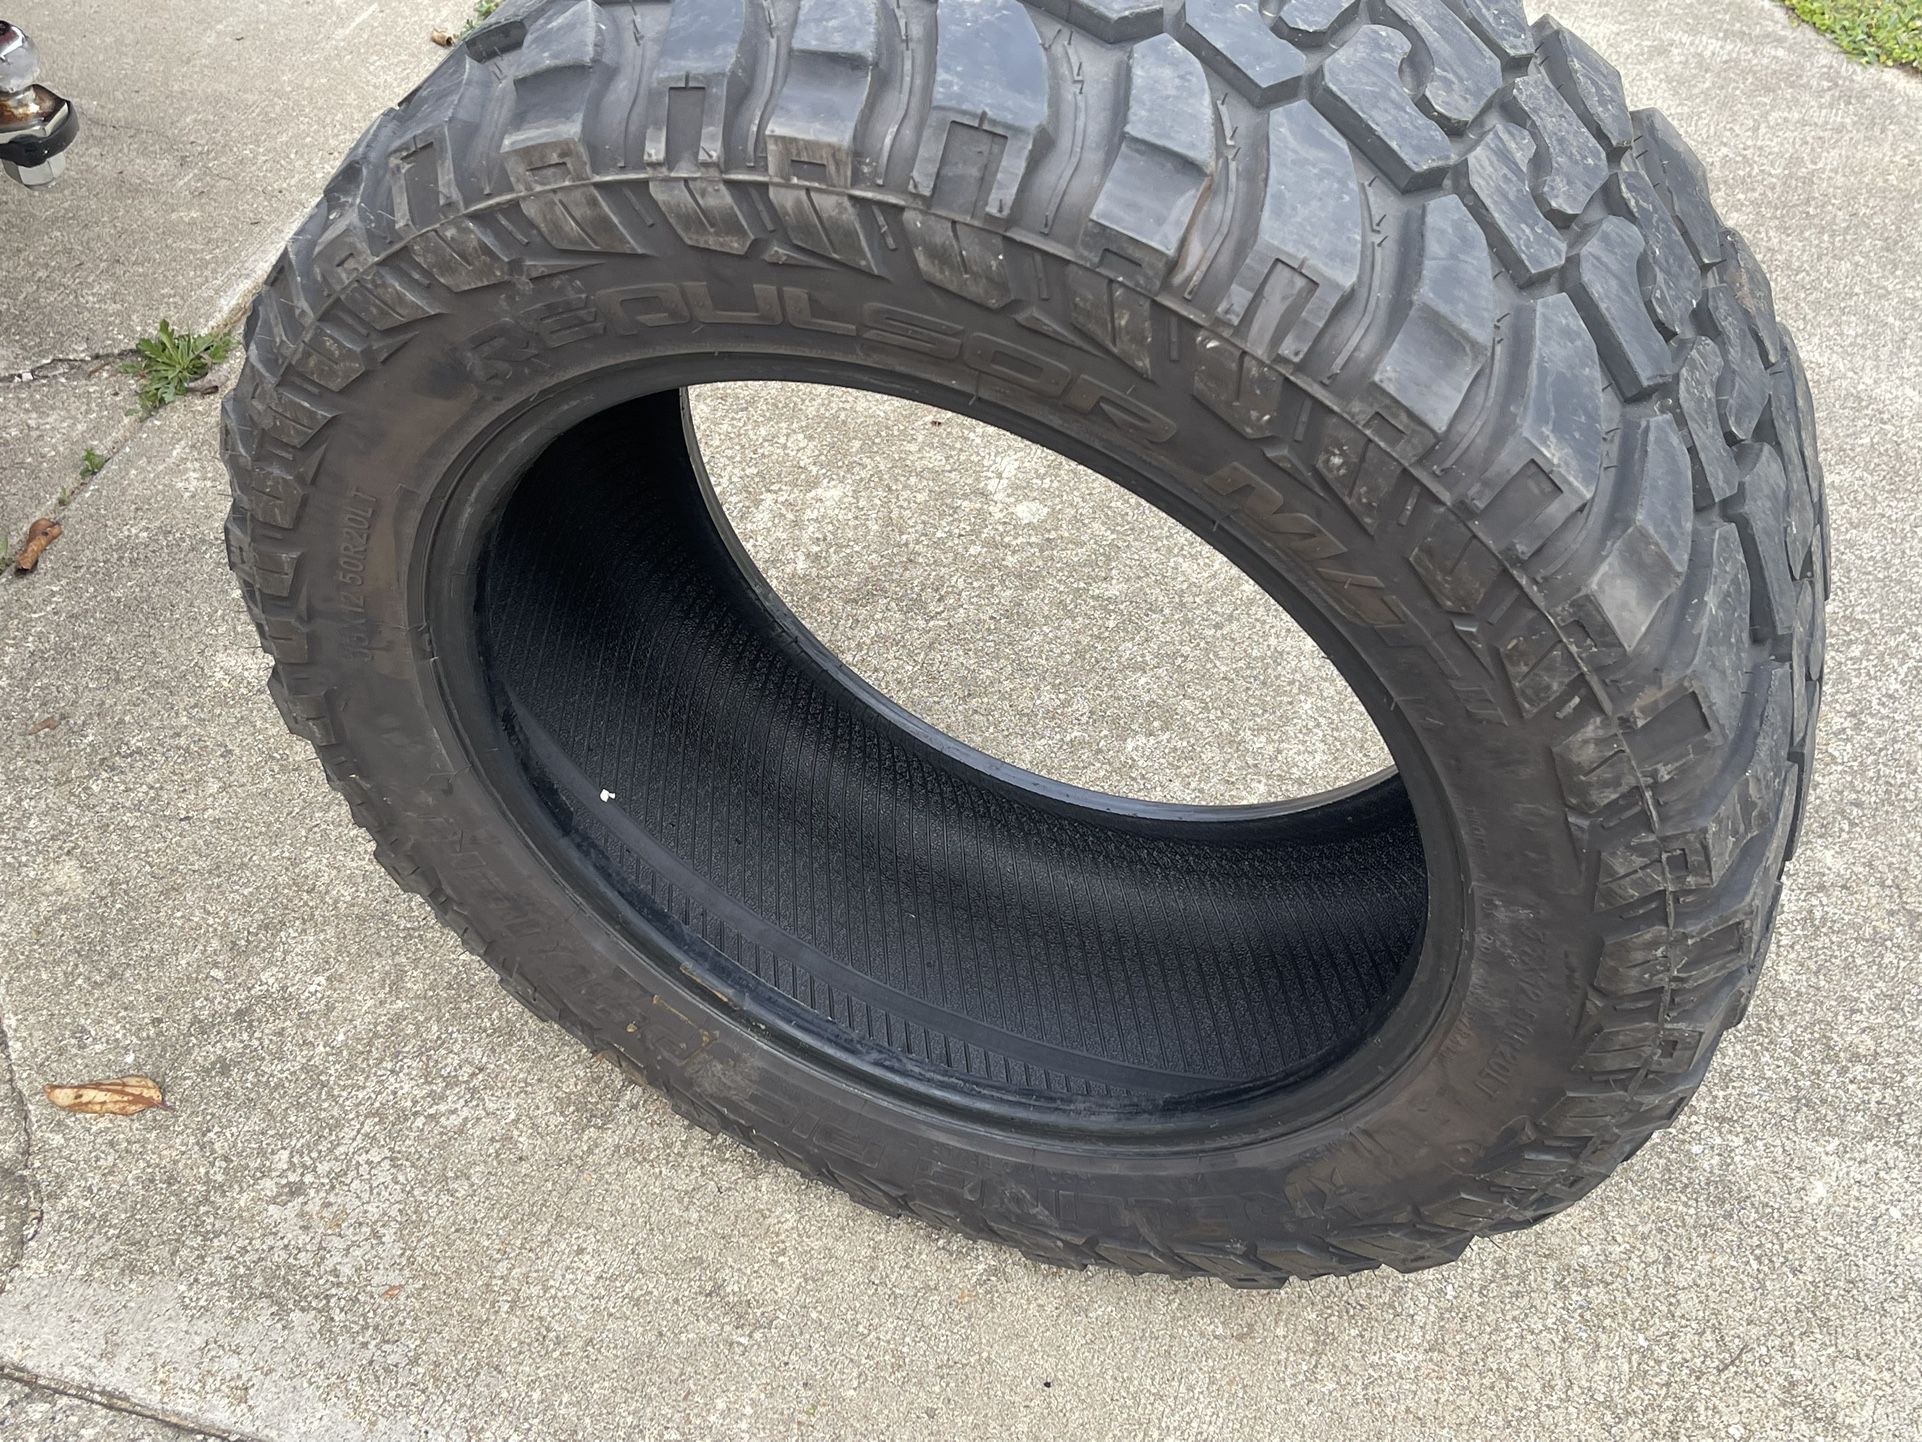 33.12.50r 20 Tires  Set Of 4